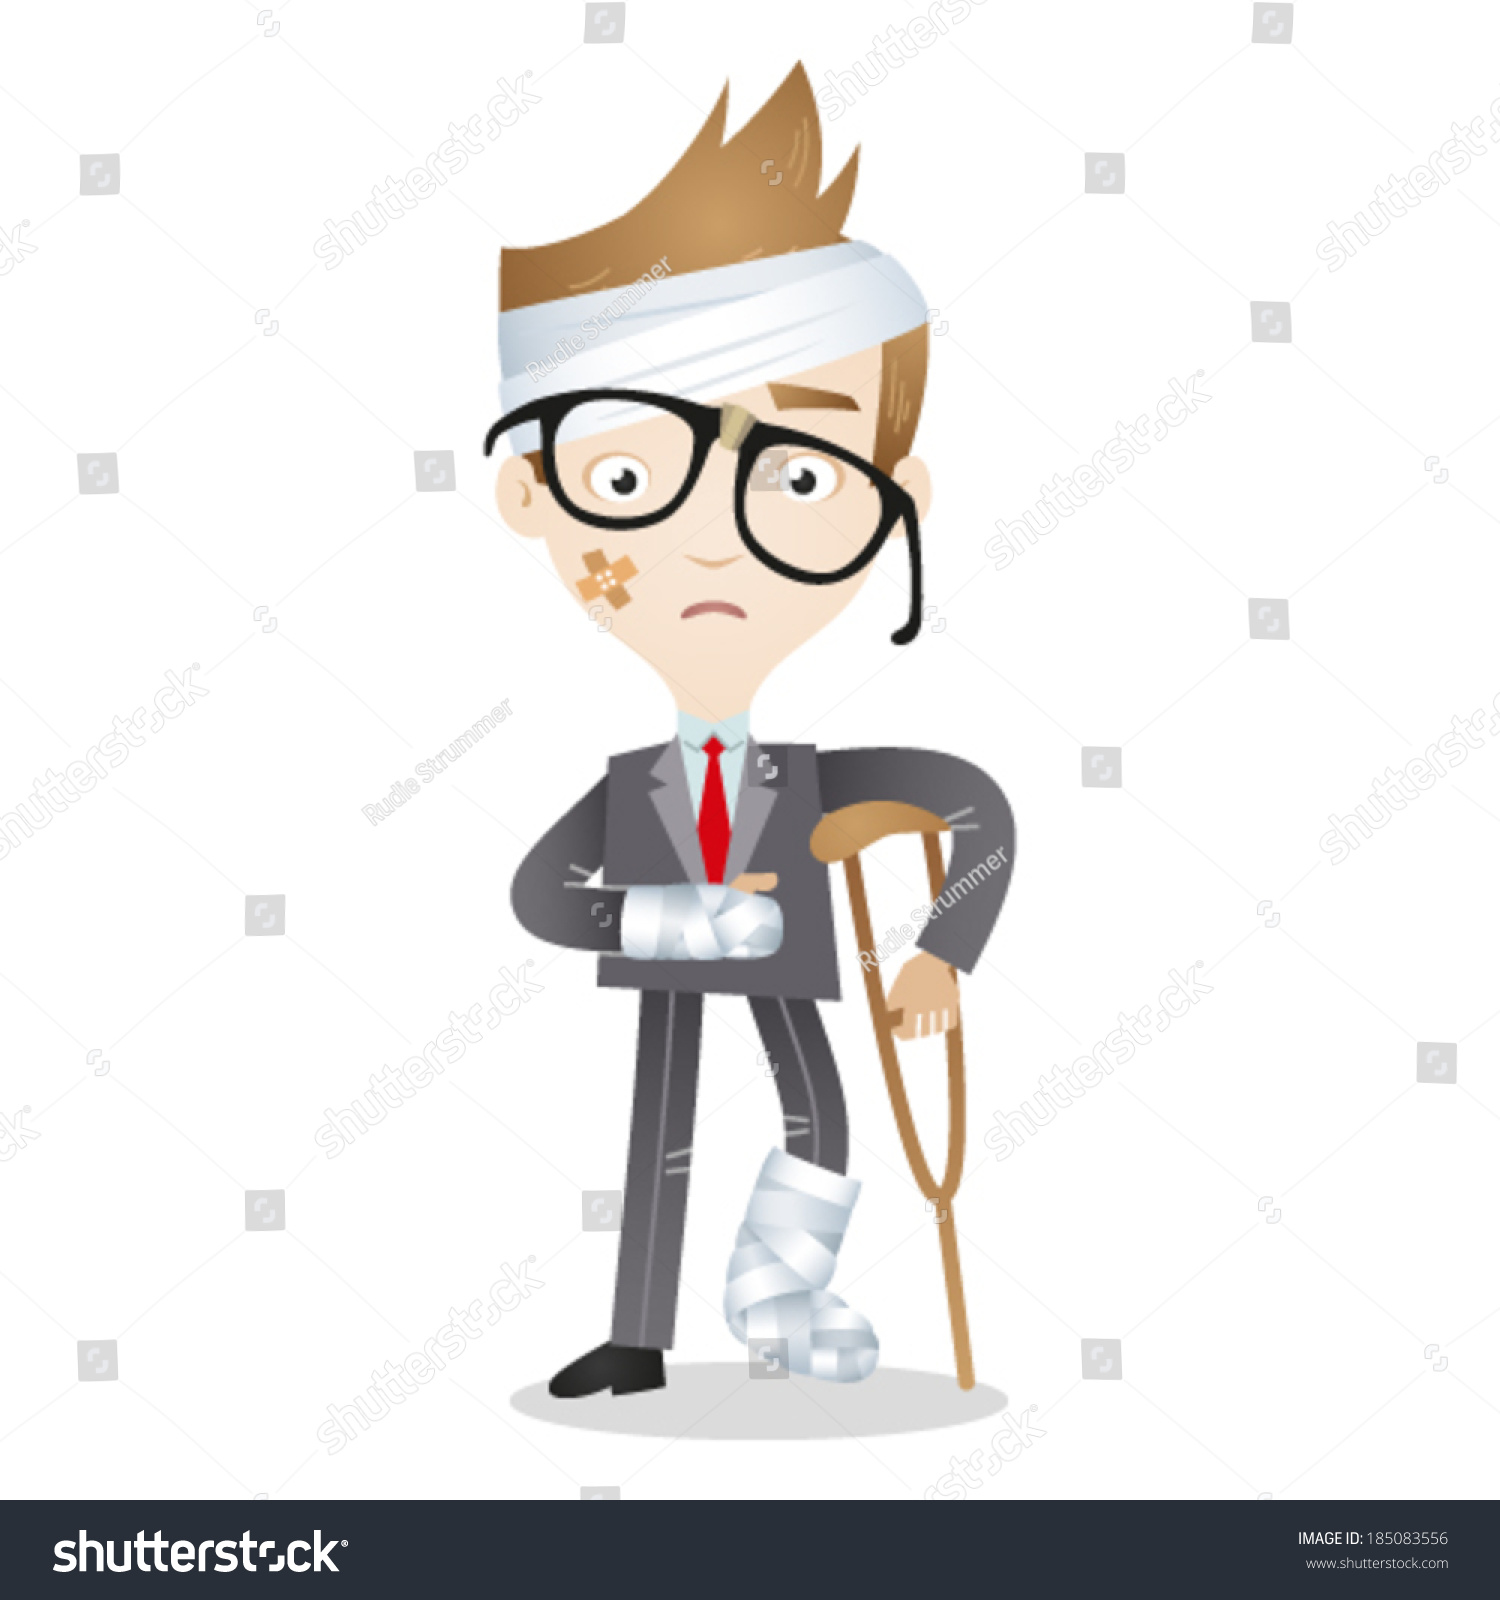 Vector Illustration Of An Injured Cartoon Businessman In Bandages And ...